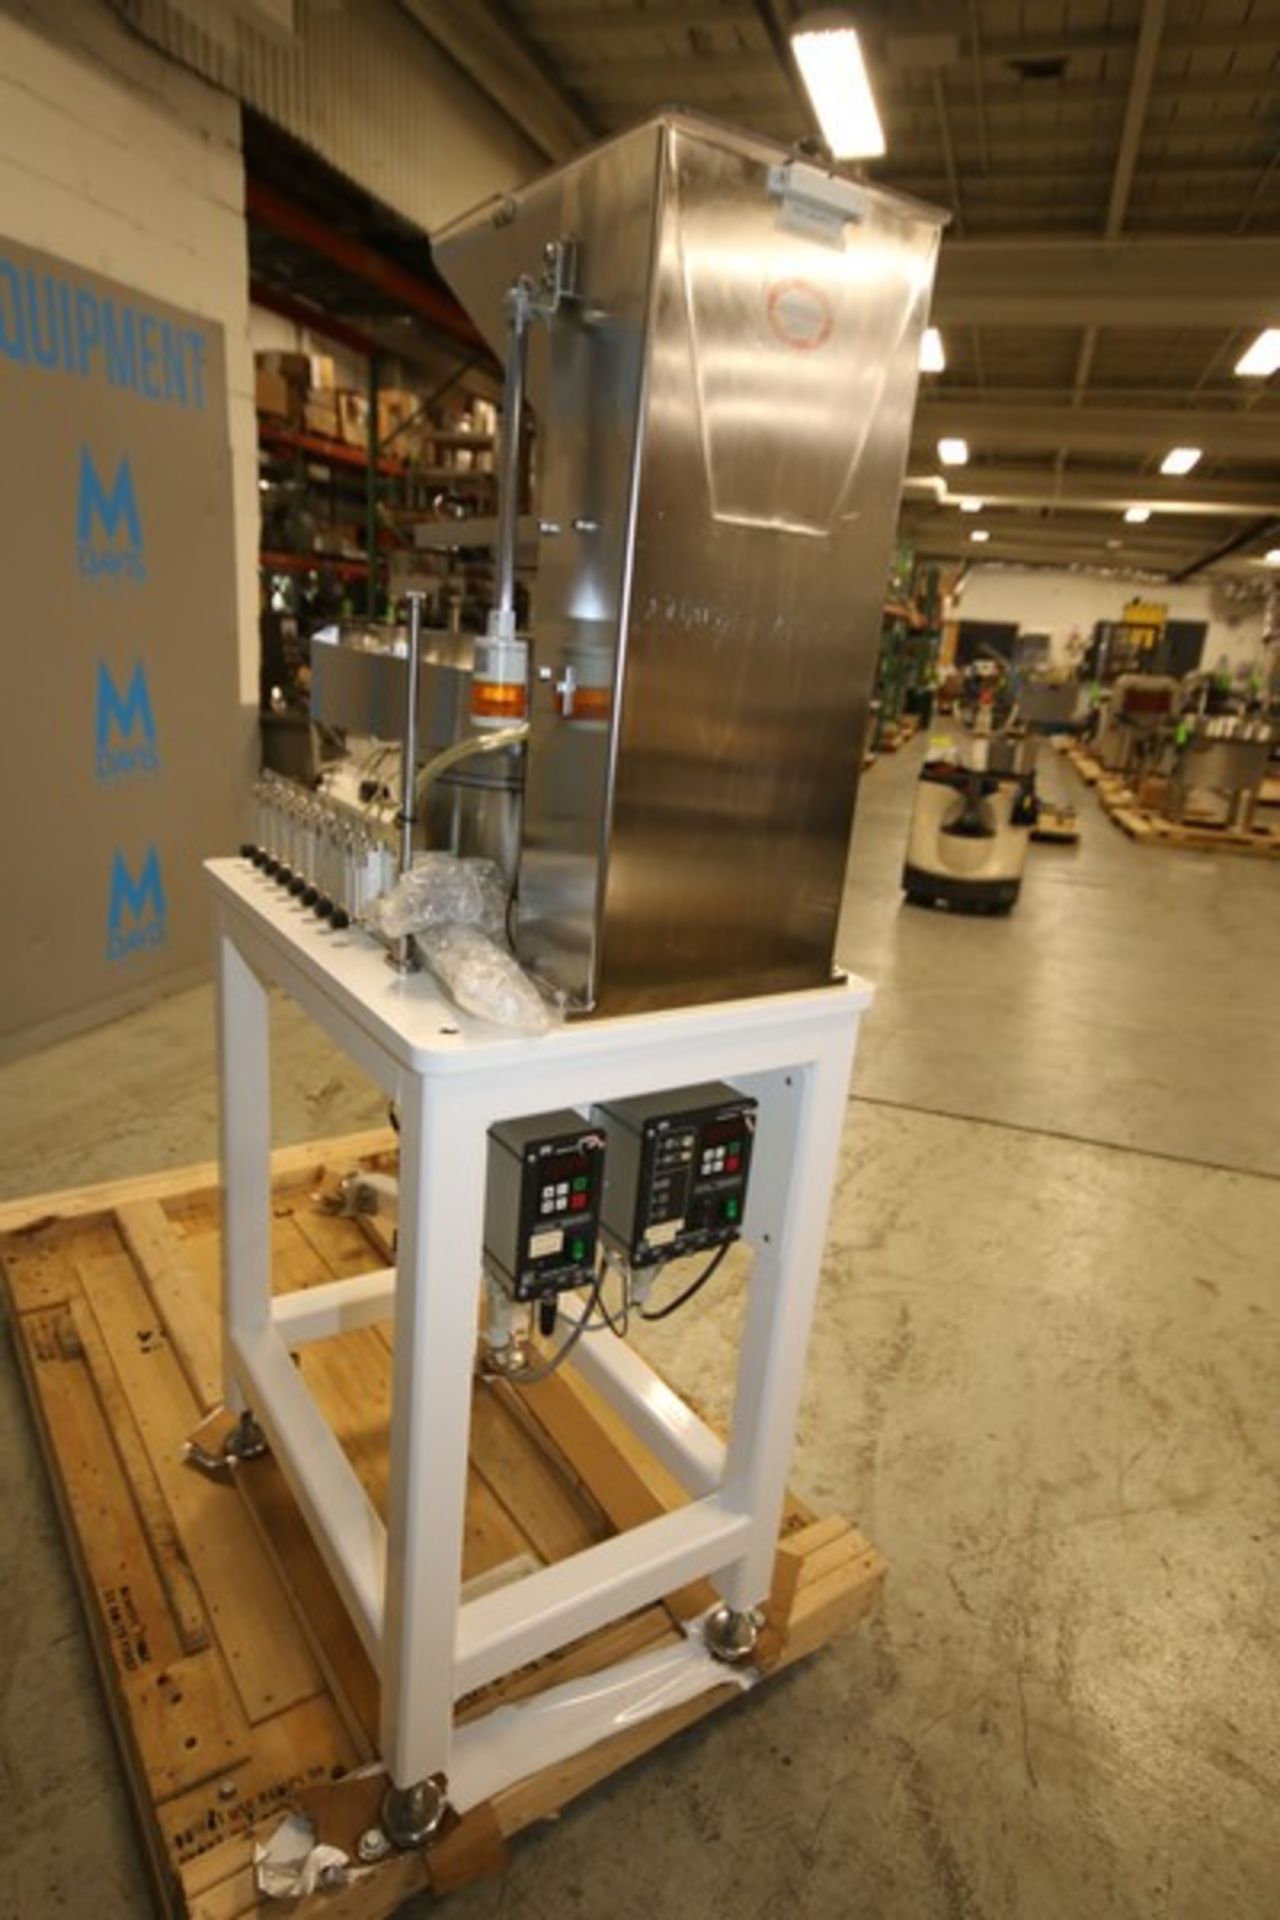 California 12" Vibratory S/S Cap Feeder, Model IN060, PN Needle Retainer, Job #7512, 110V, with - Image 9 of 12